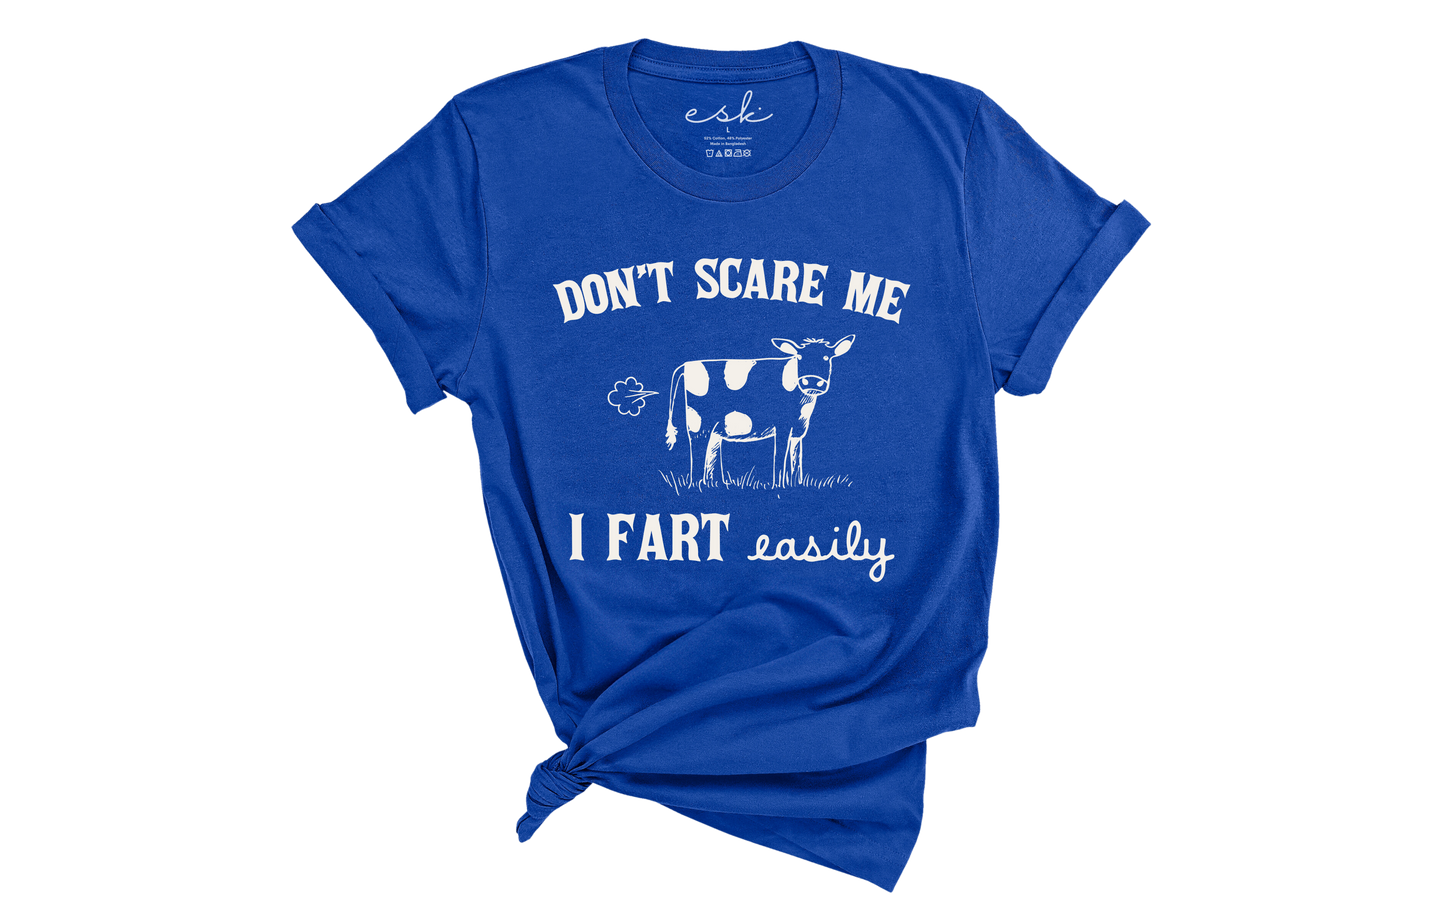 Don't Scare Me Tee